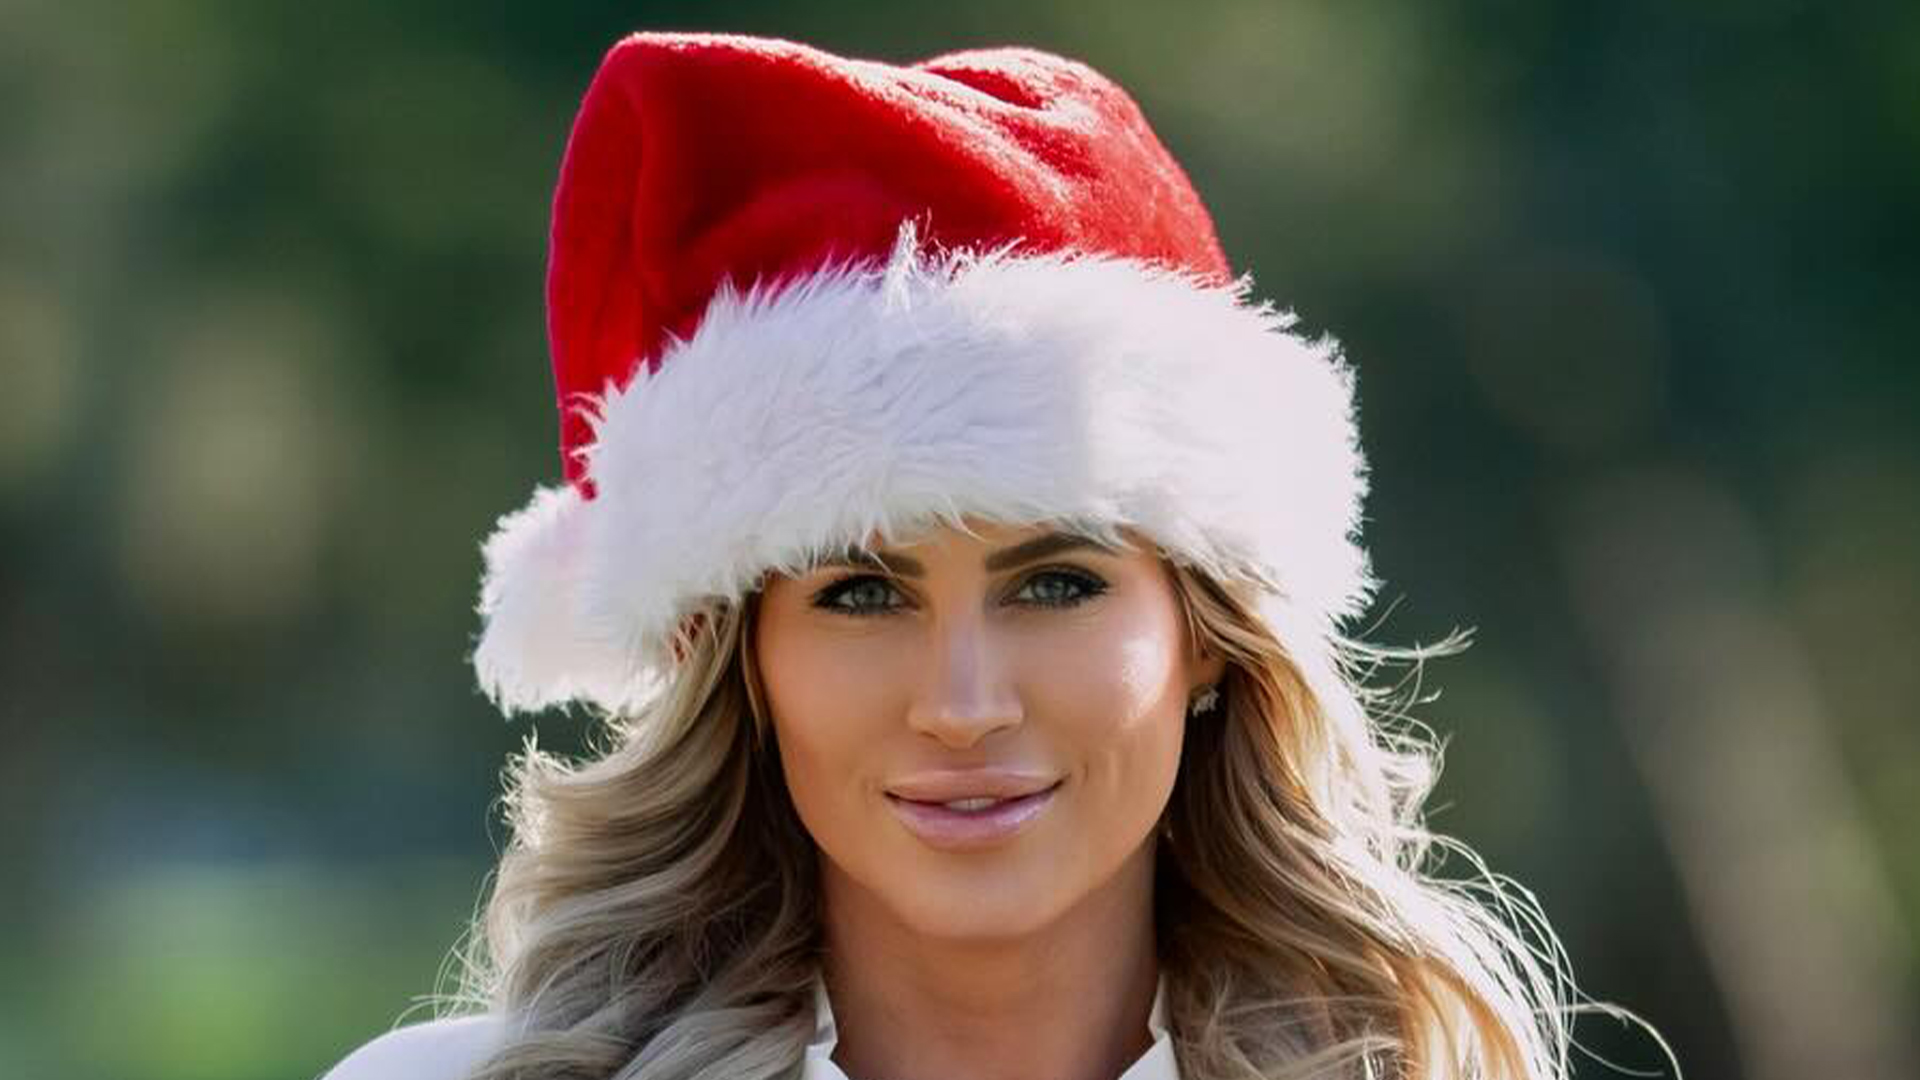 Paige Spiranac rival Karin Hart leaves fans amazed after dressing in sexy Santa outfit on golf course